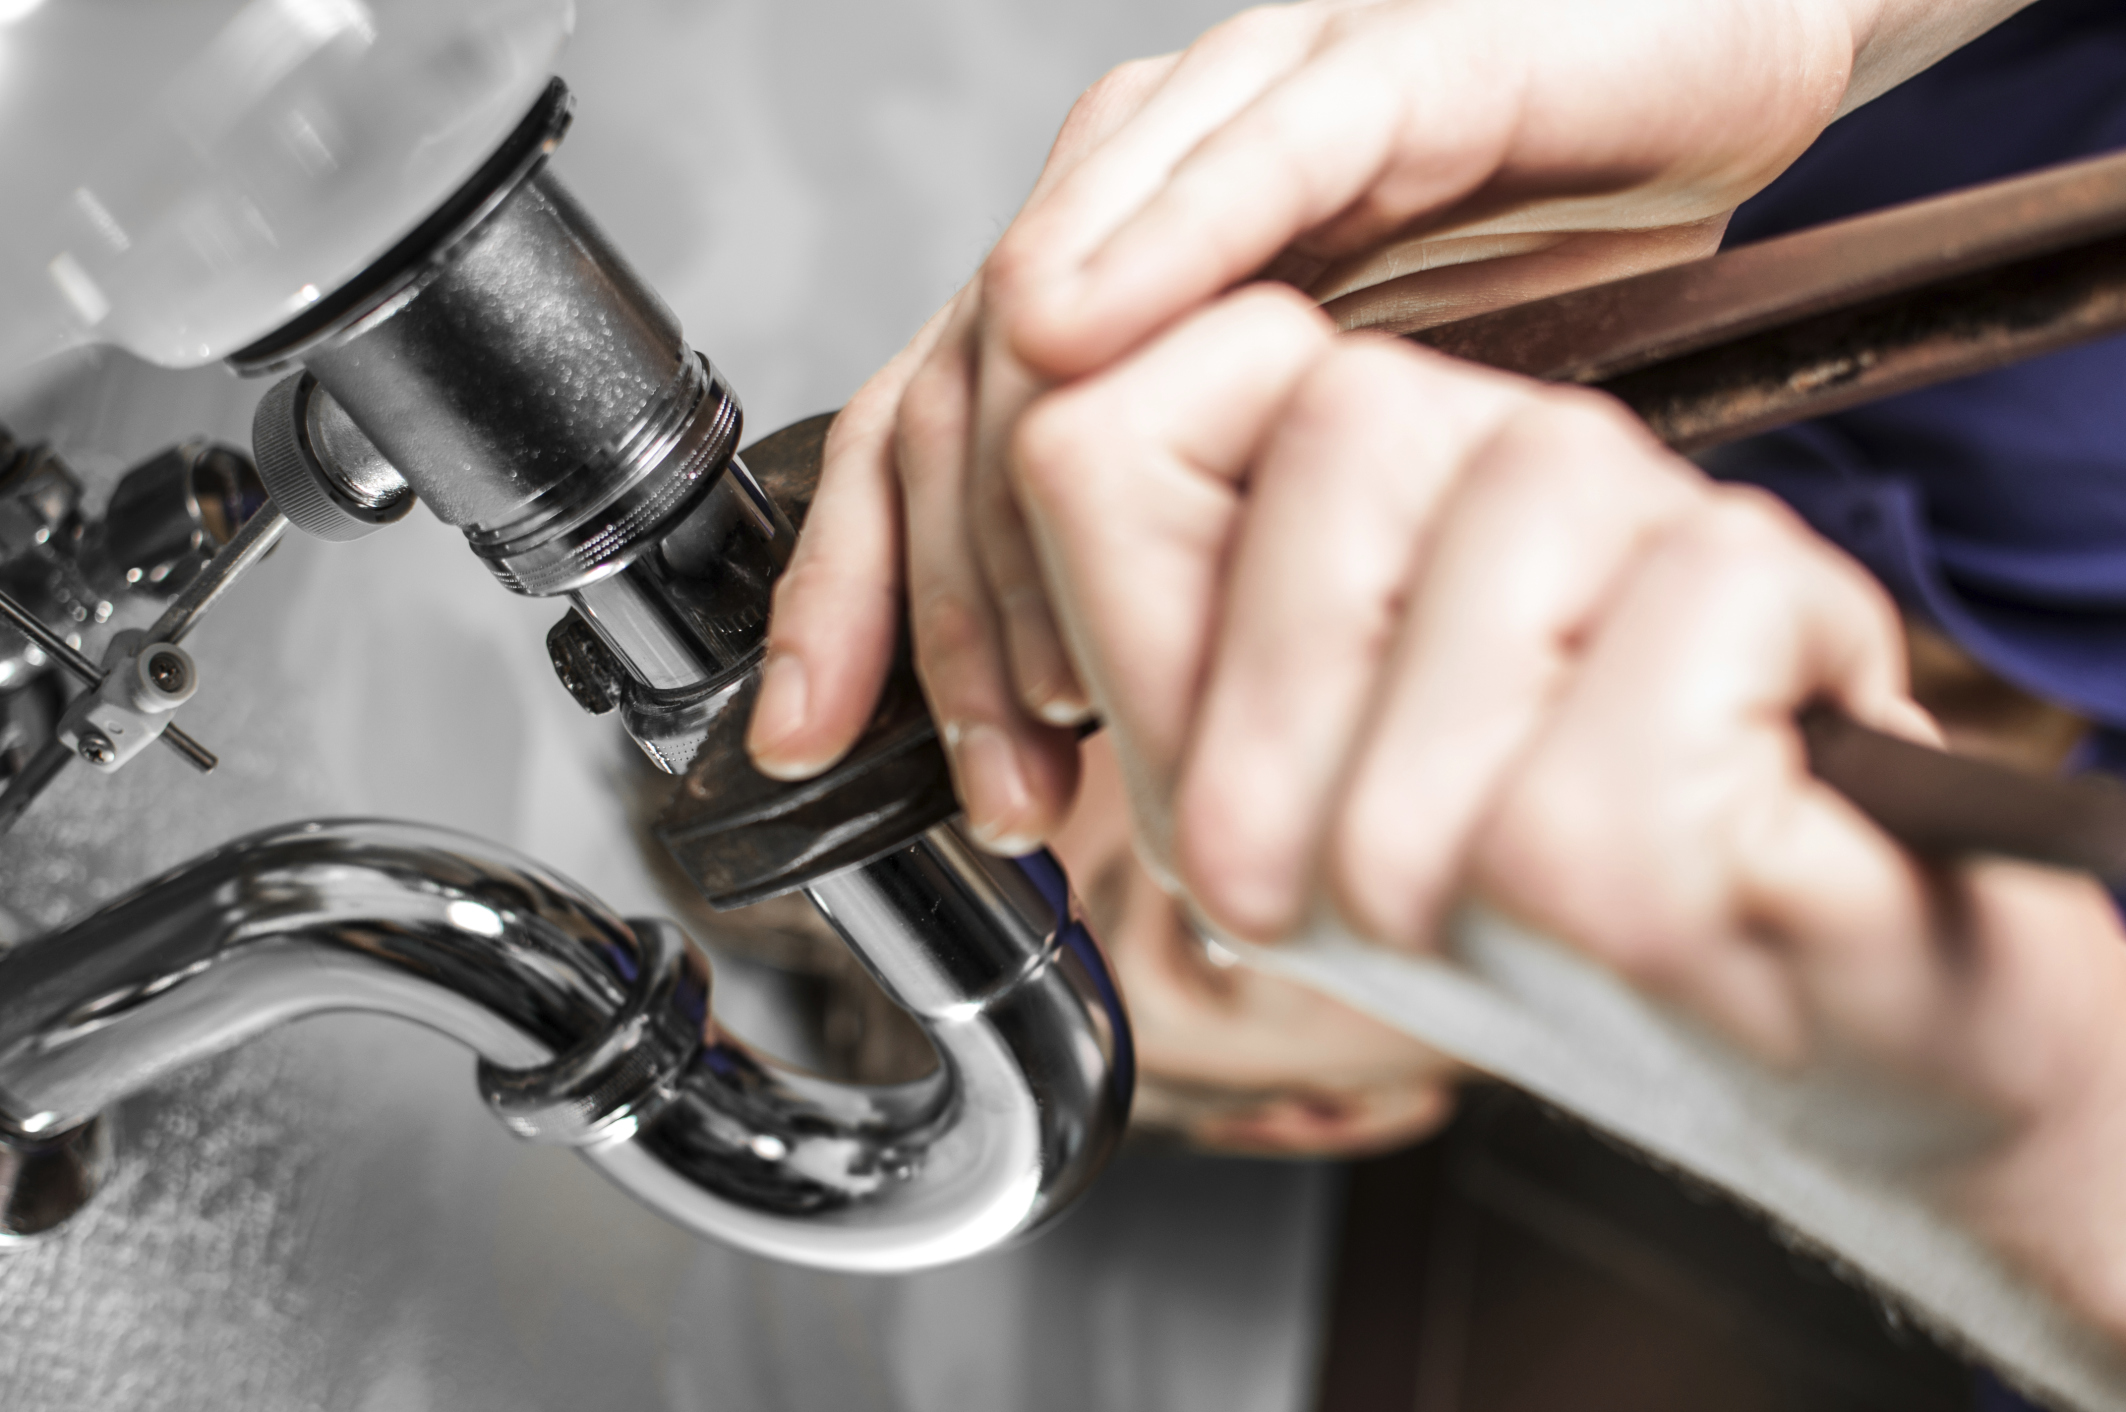 A-Z Plumbing Services